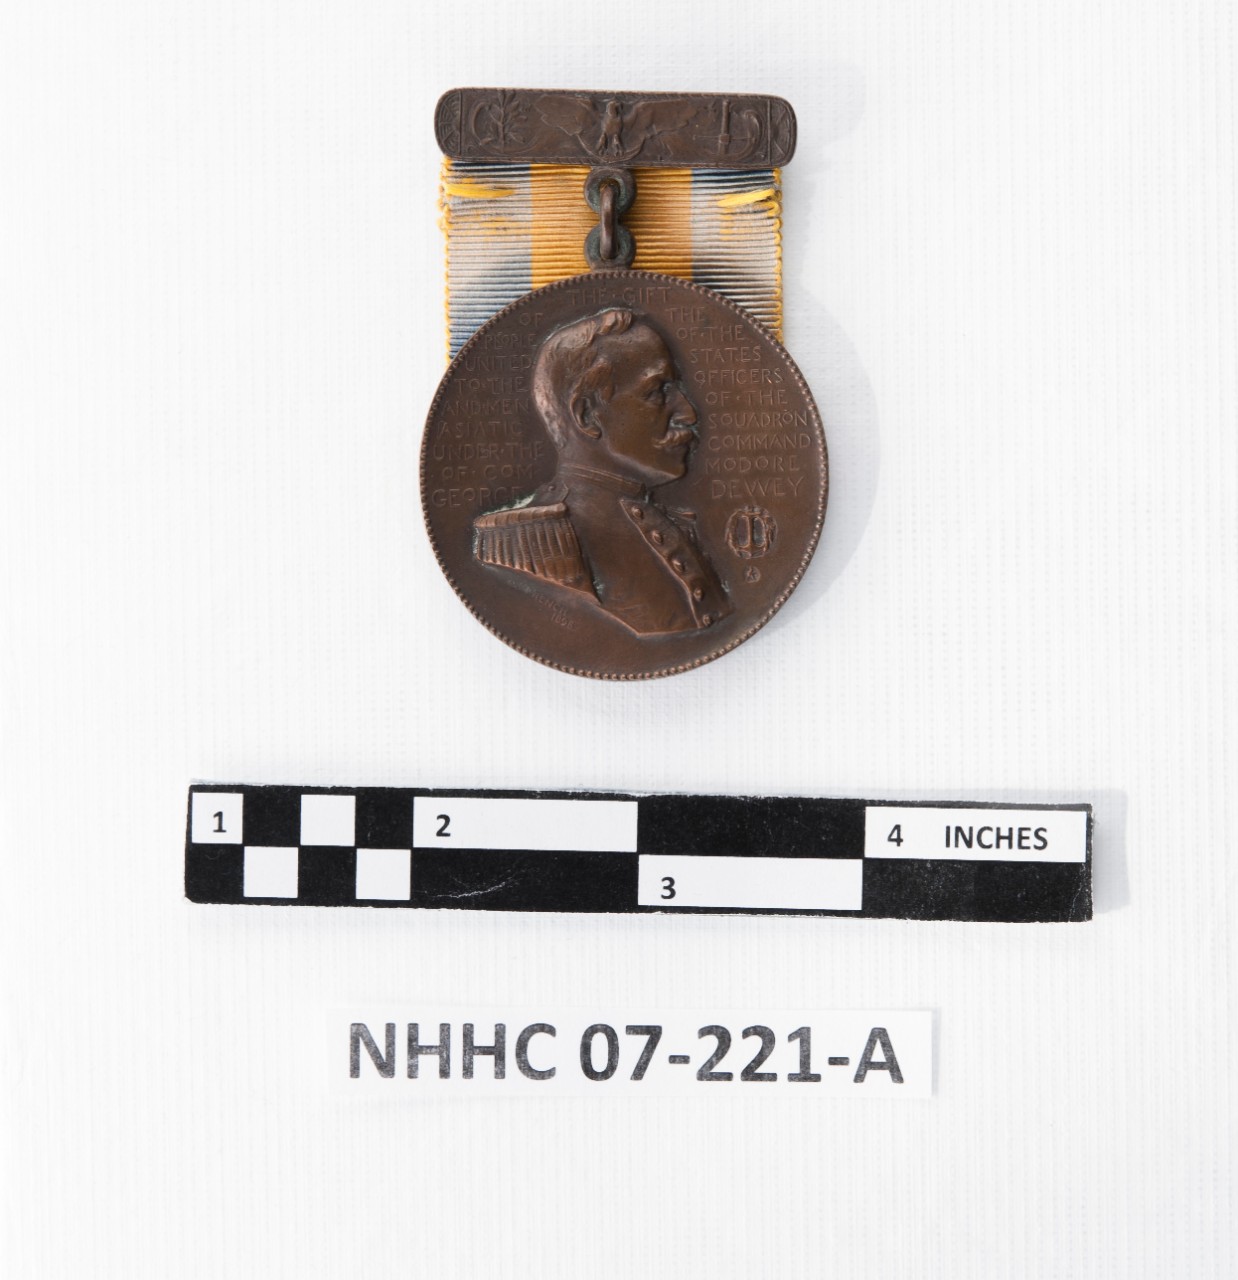 Medal with bust of dewey and text. eagle and sword depiction ribbon bar